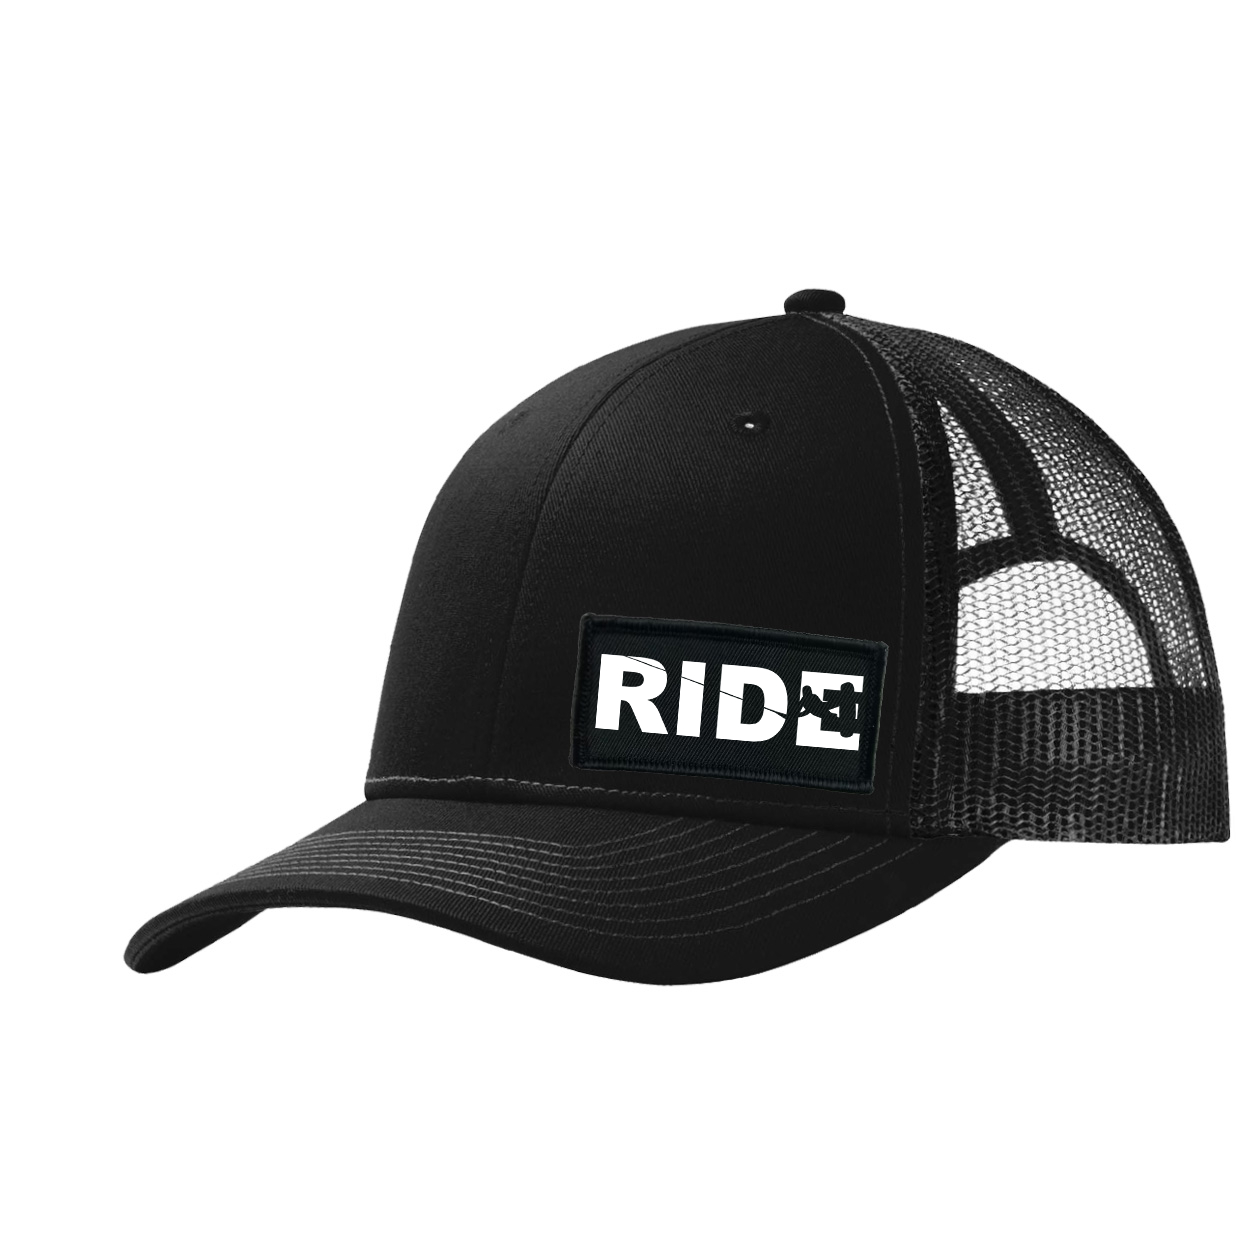 Ride Wakeboard Logo Night Out Woven Patch Snapback Trucker Hat Black (White Logo)